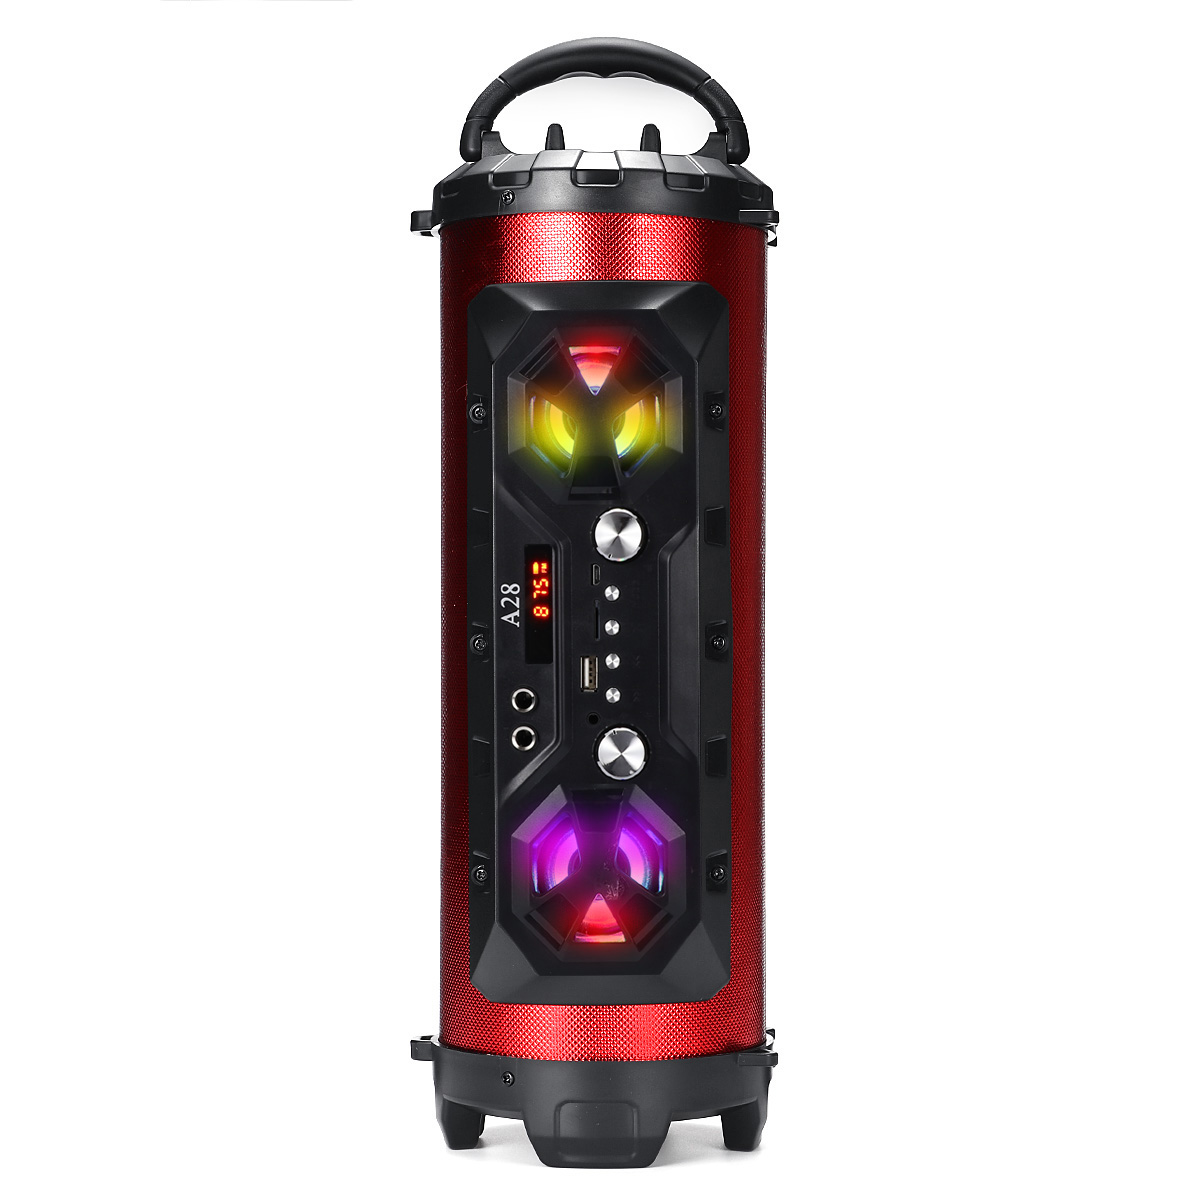 Unique Portable LED Wireless Portable bluetooth 4.2 Speaker Stereo Sound Super Bass HIFI AUX FM Subwoofer Loudspeaker ,RGB Colorful Lights, EQ, Booming Bass, Outdoor Speaker for Home, Party, Camping - image 4 of 9